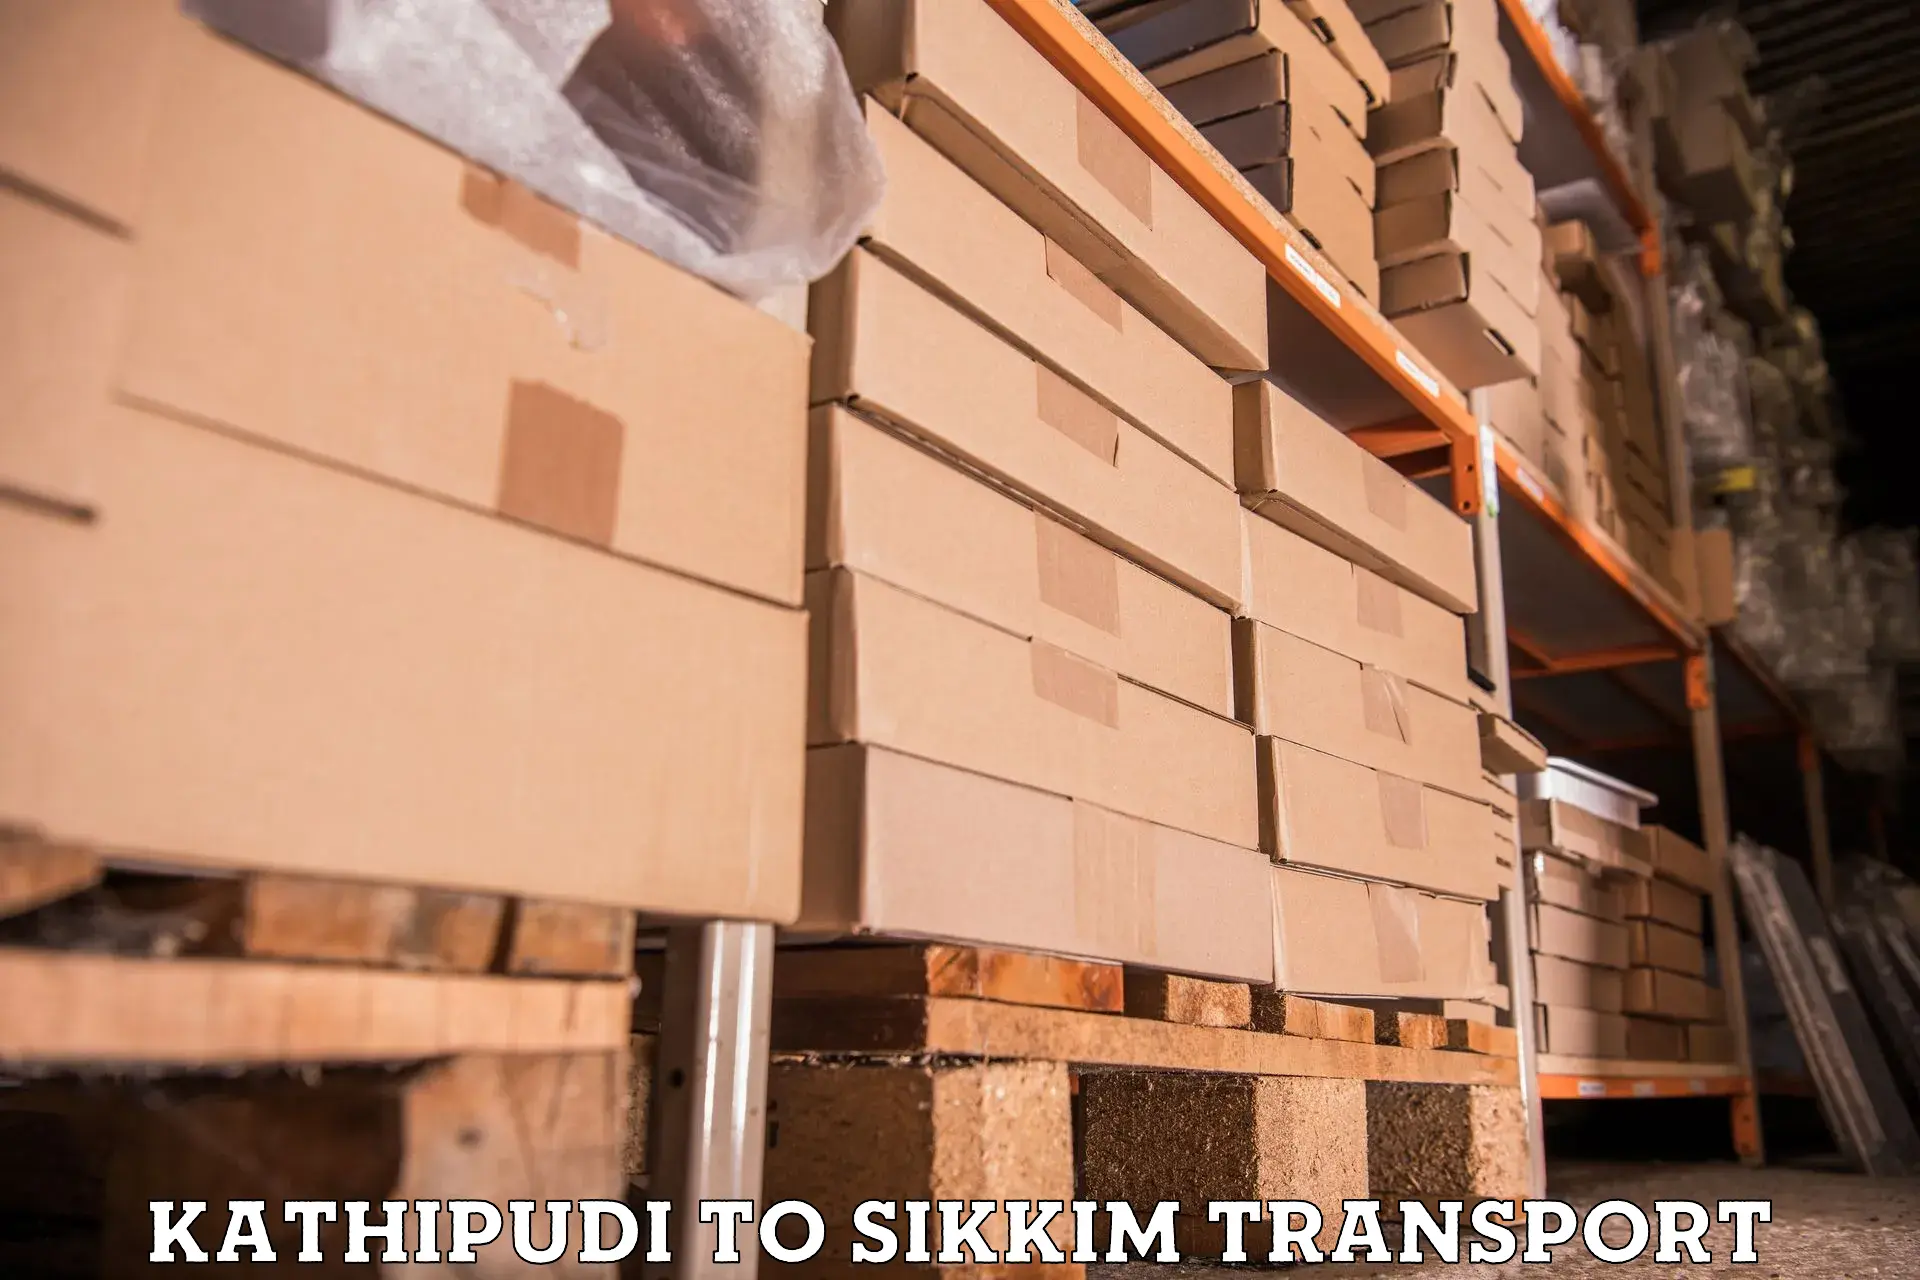 Lorry transport service Kathipudi to Pelling